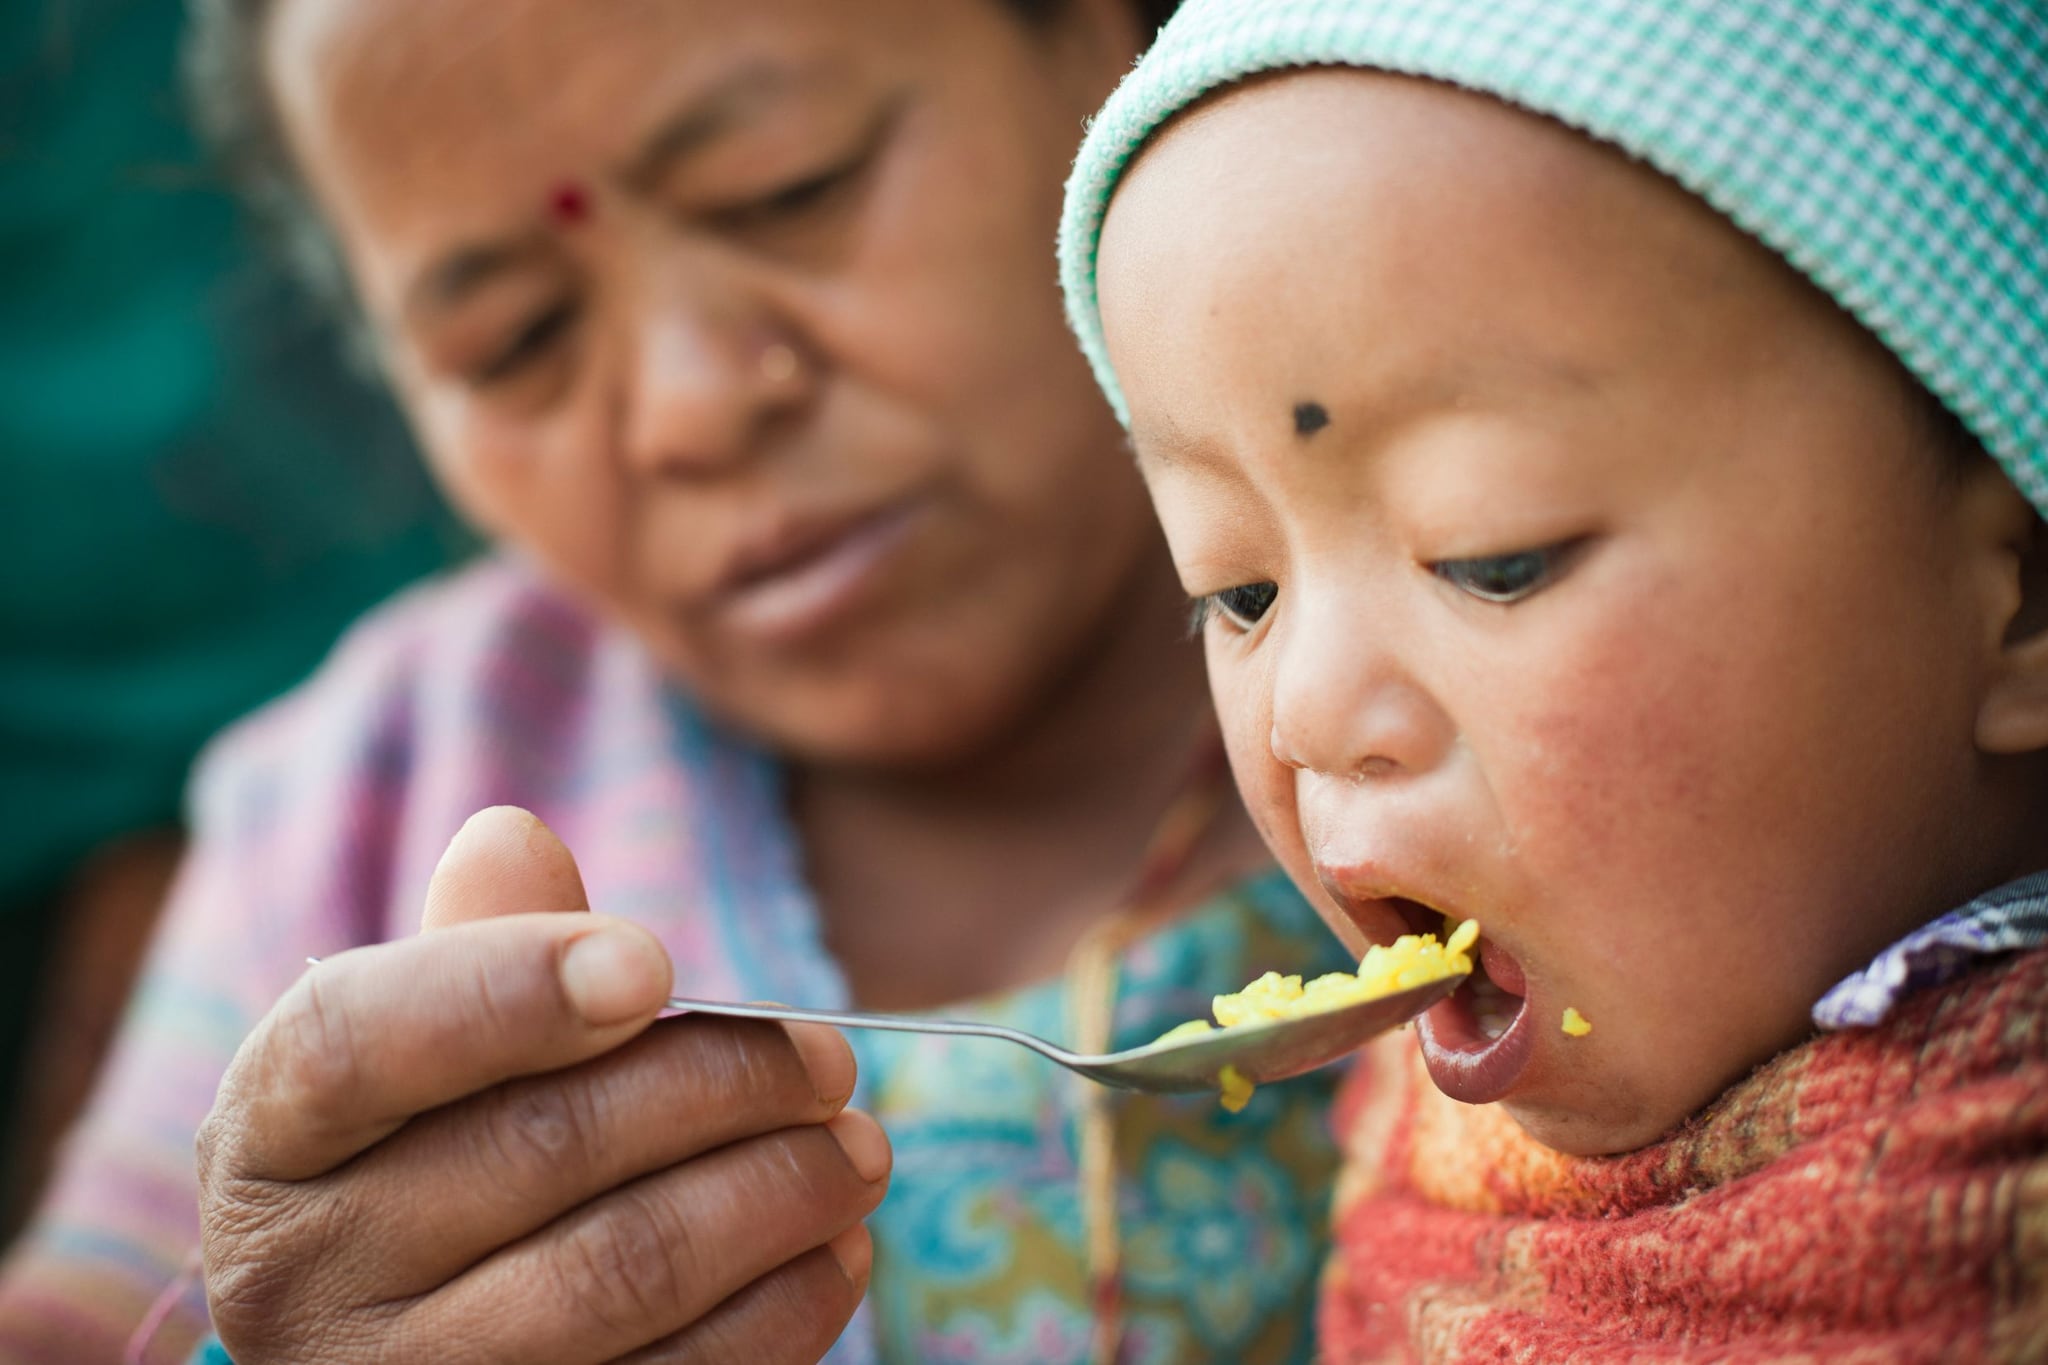 Asian woman feeding young child